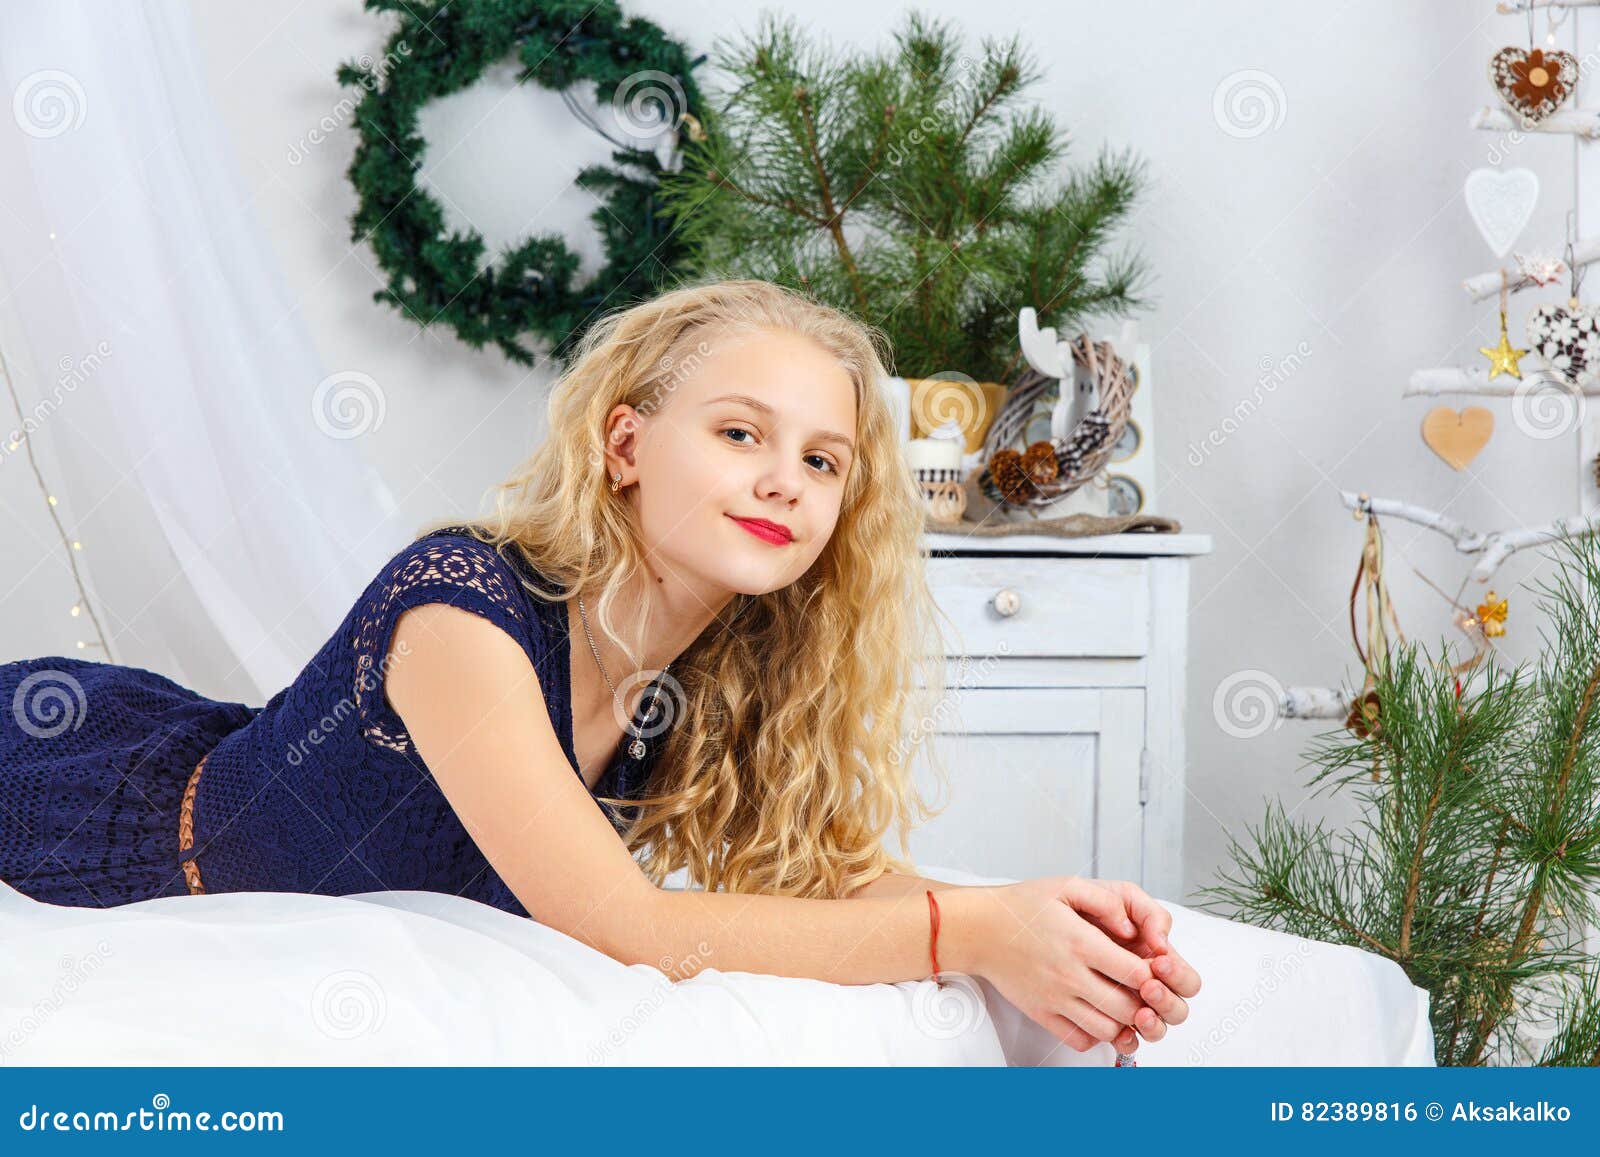 Young looking teen on bed